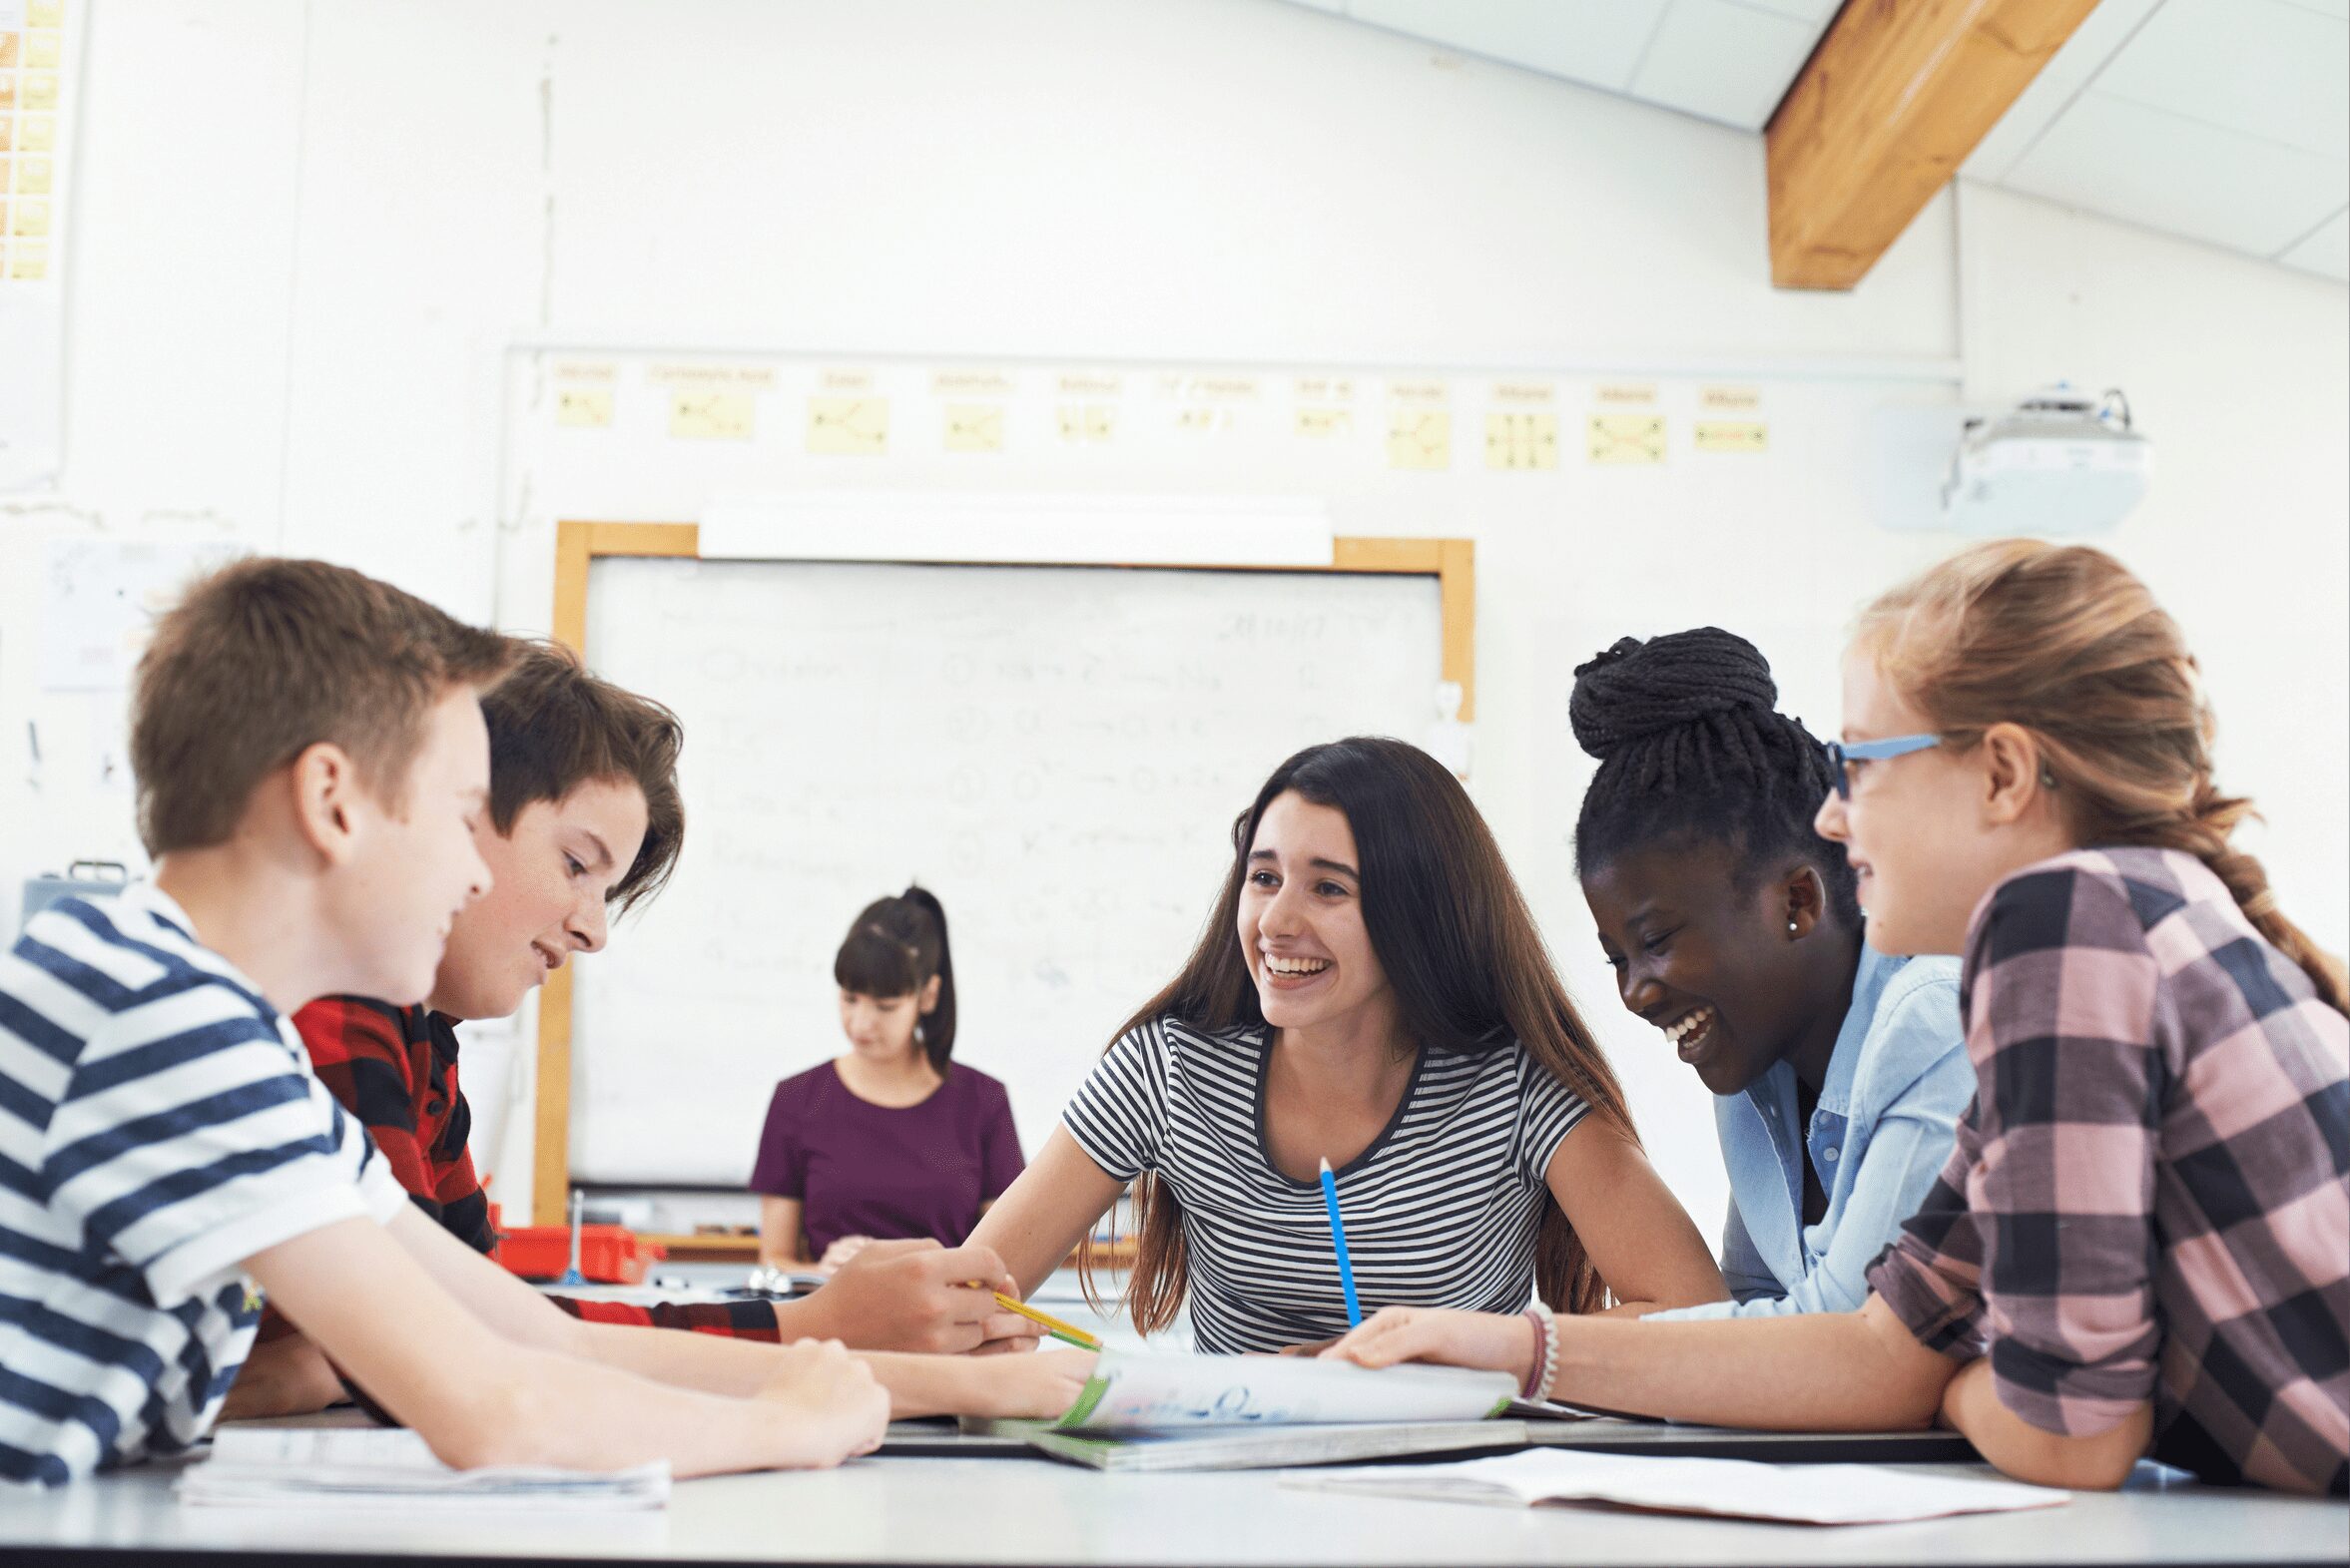 A group of teenage students smiling and laughing together while they work on a task in class.